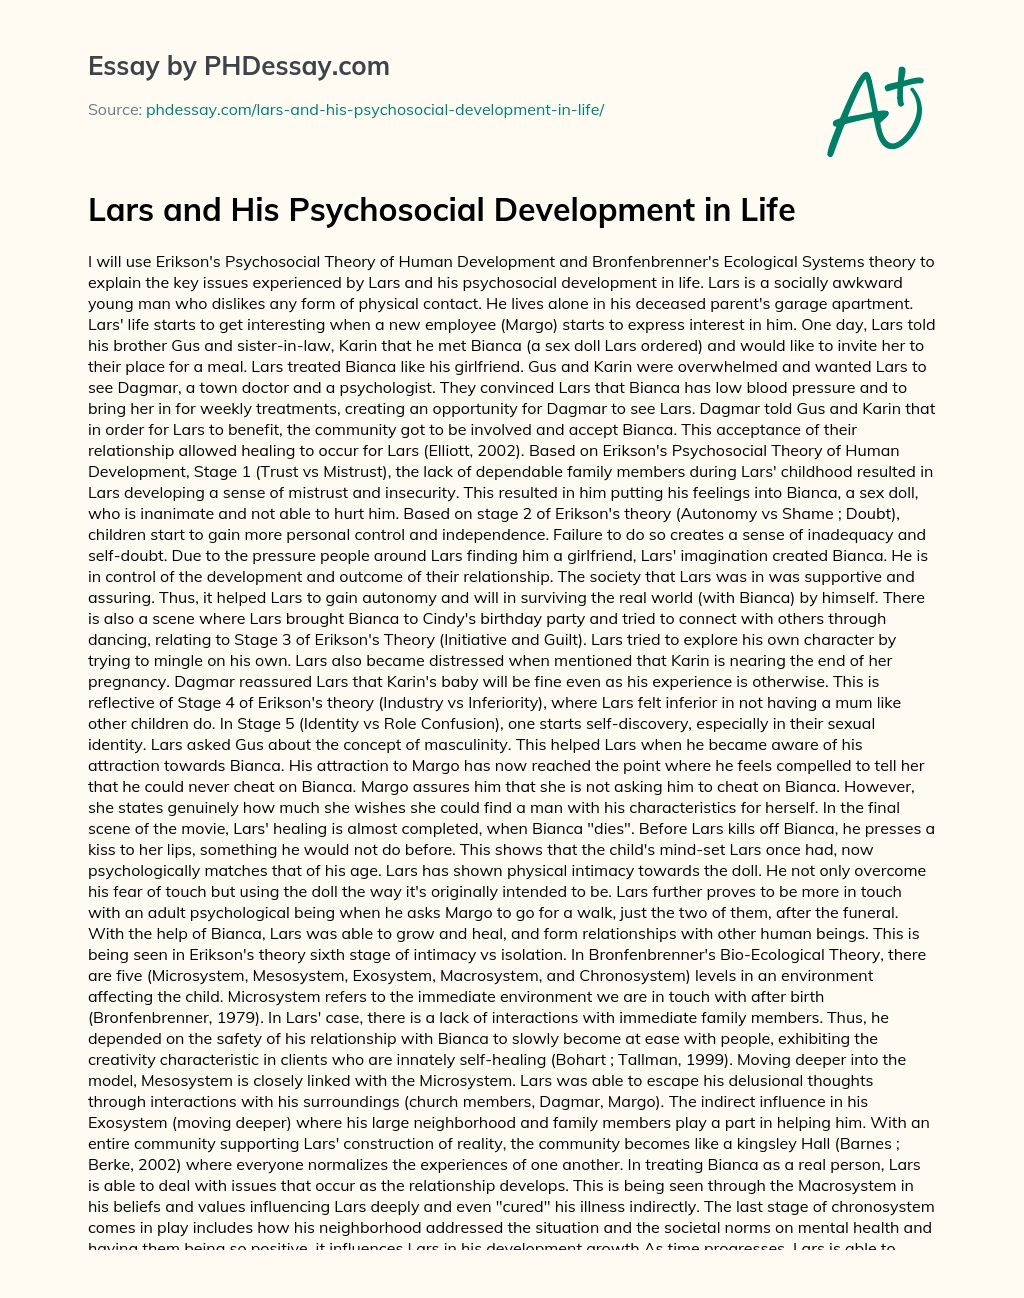 Lars and His Psychosocial Development in Life essay